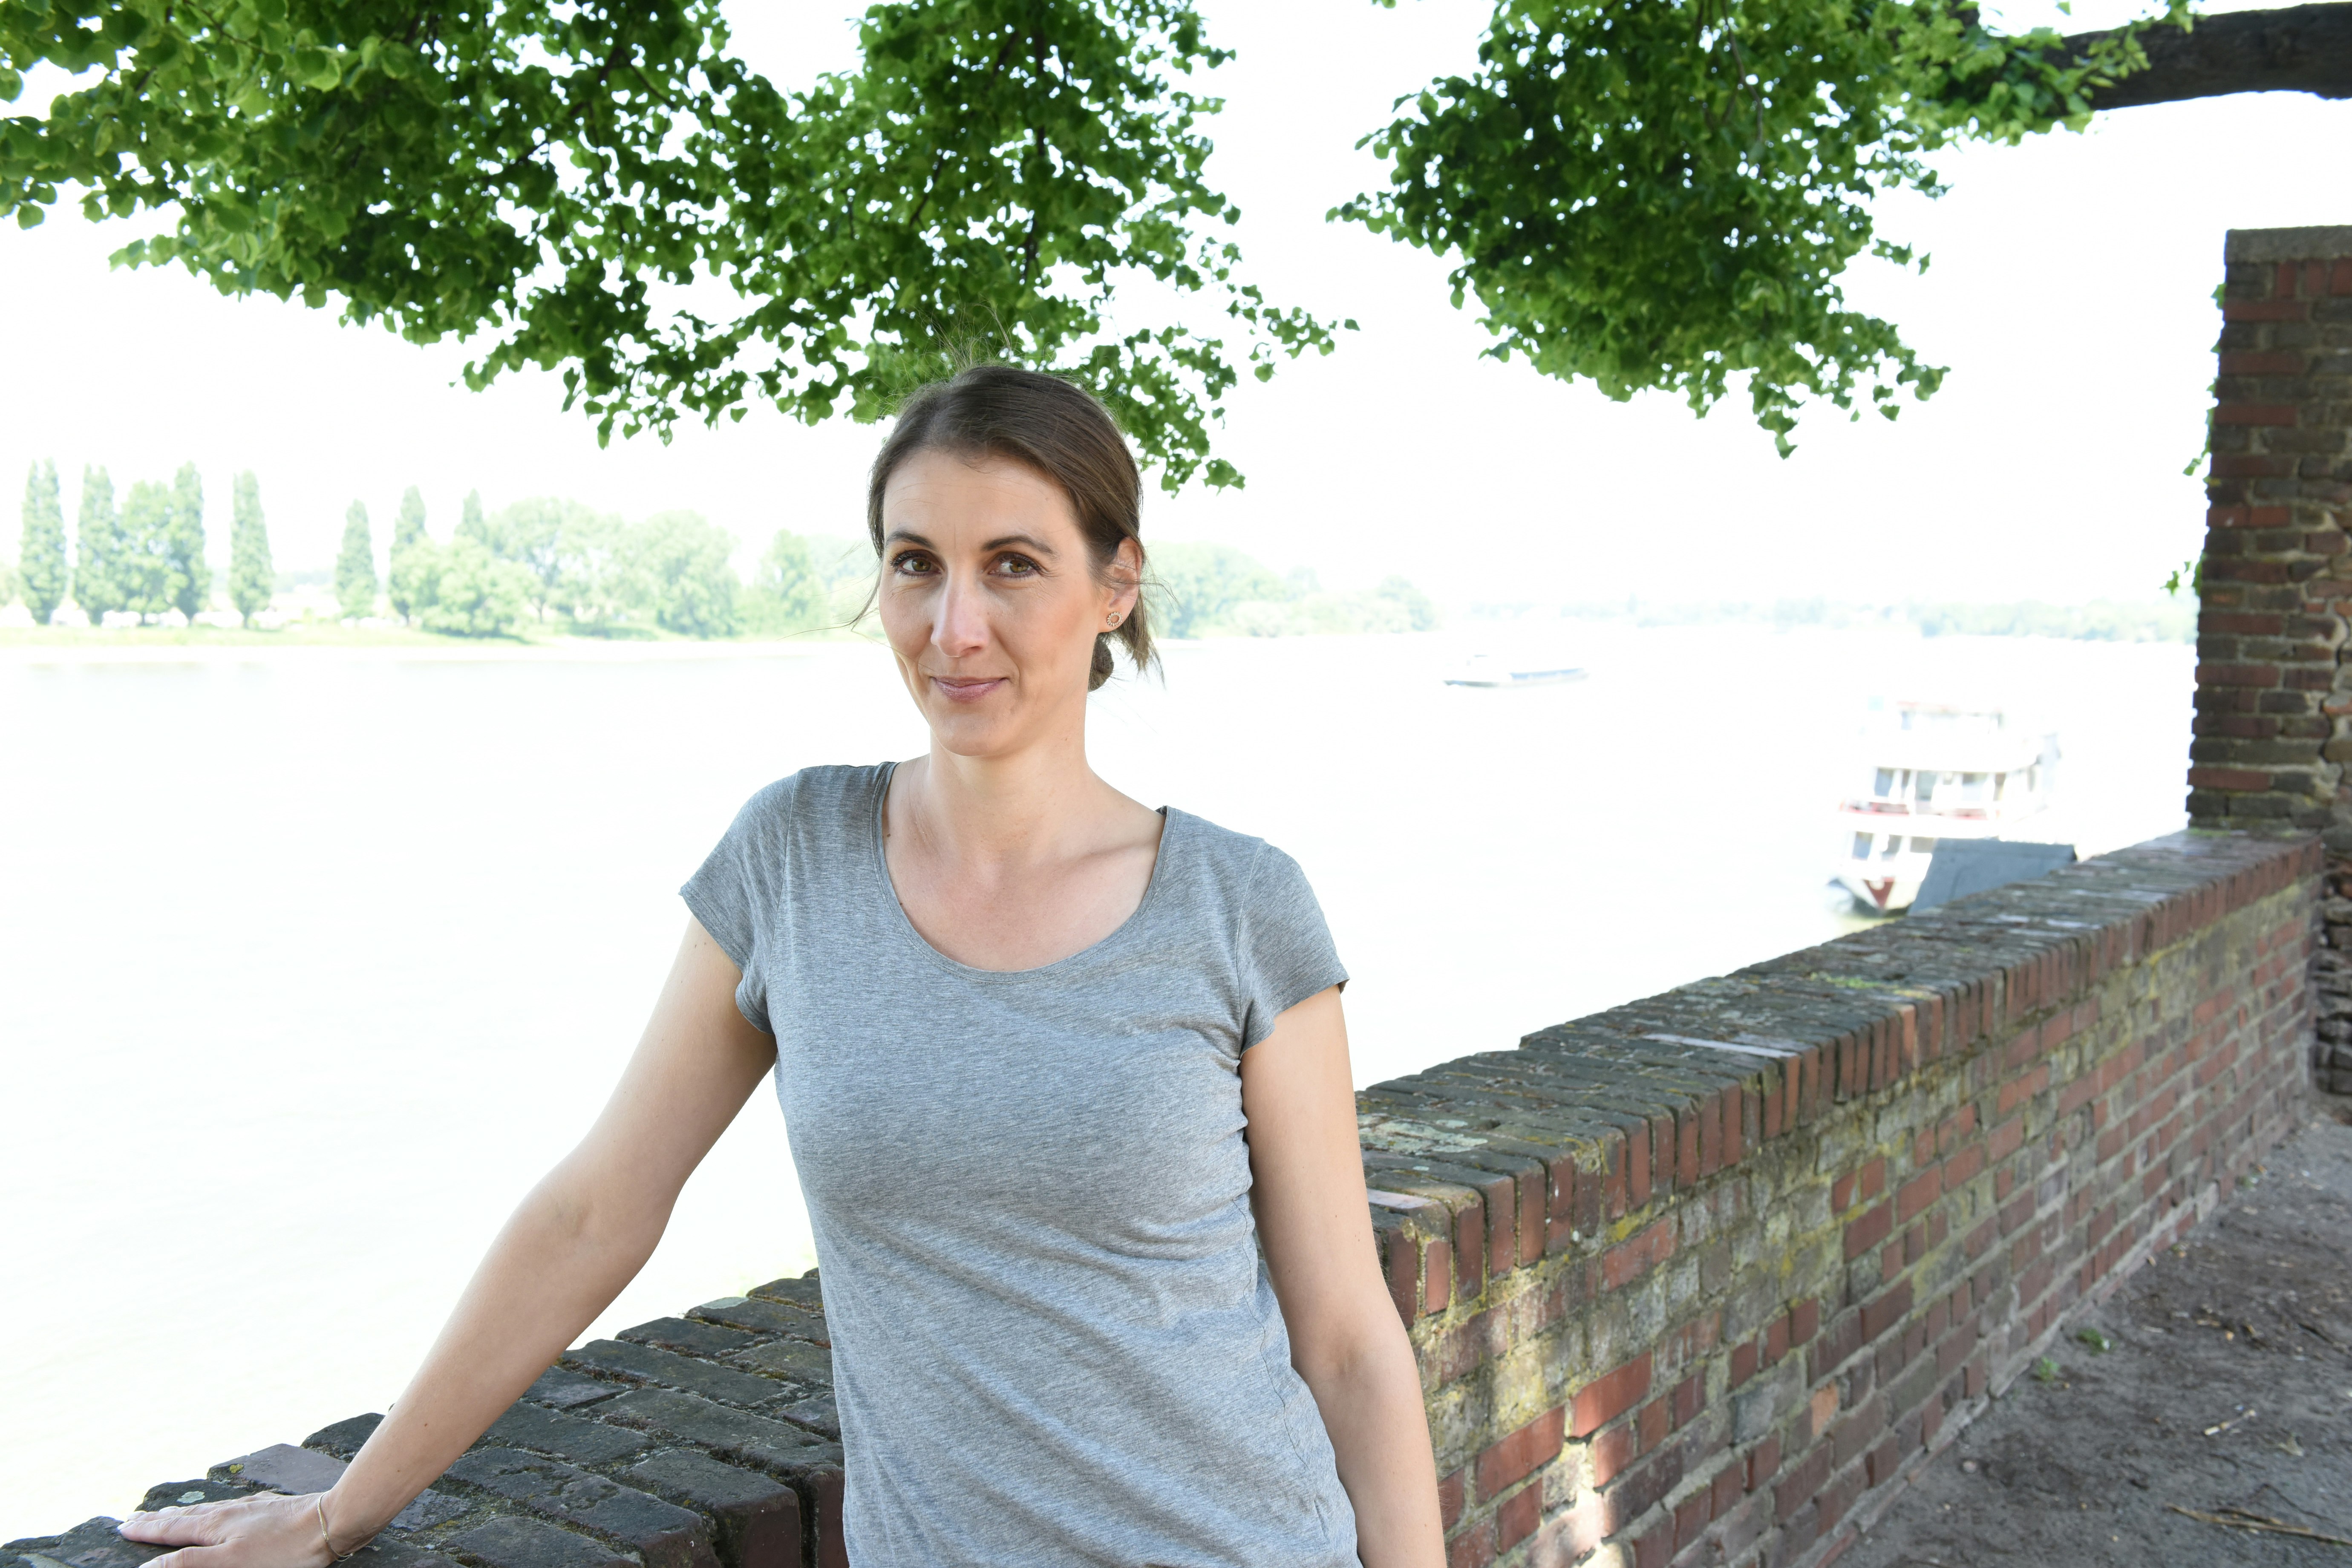 Katrin stands close to a brick wall at the river rhine.